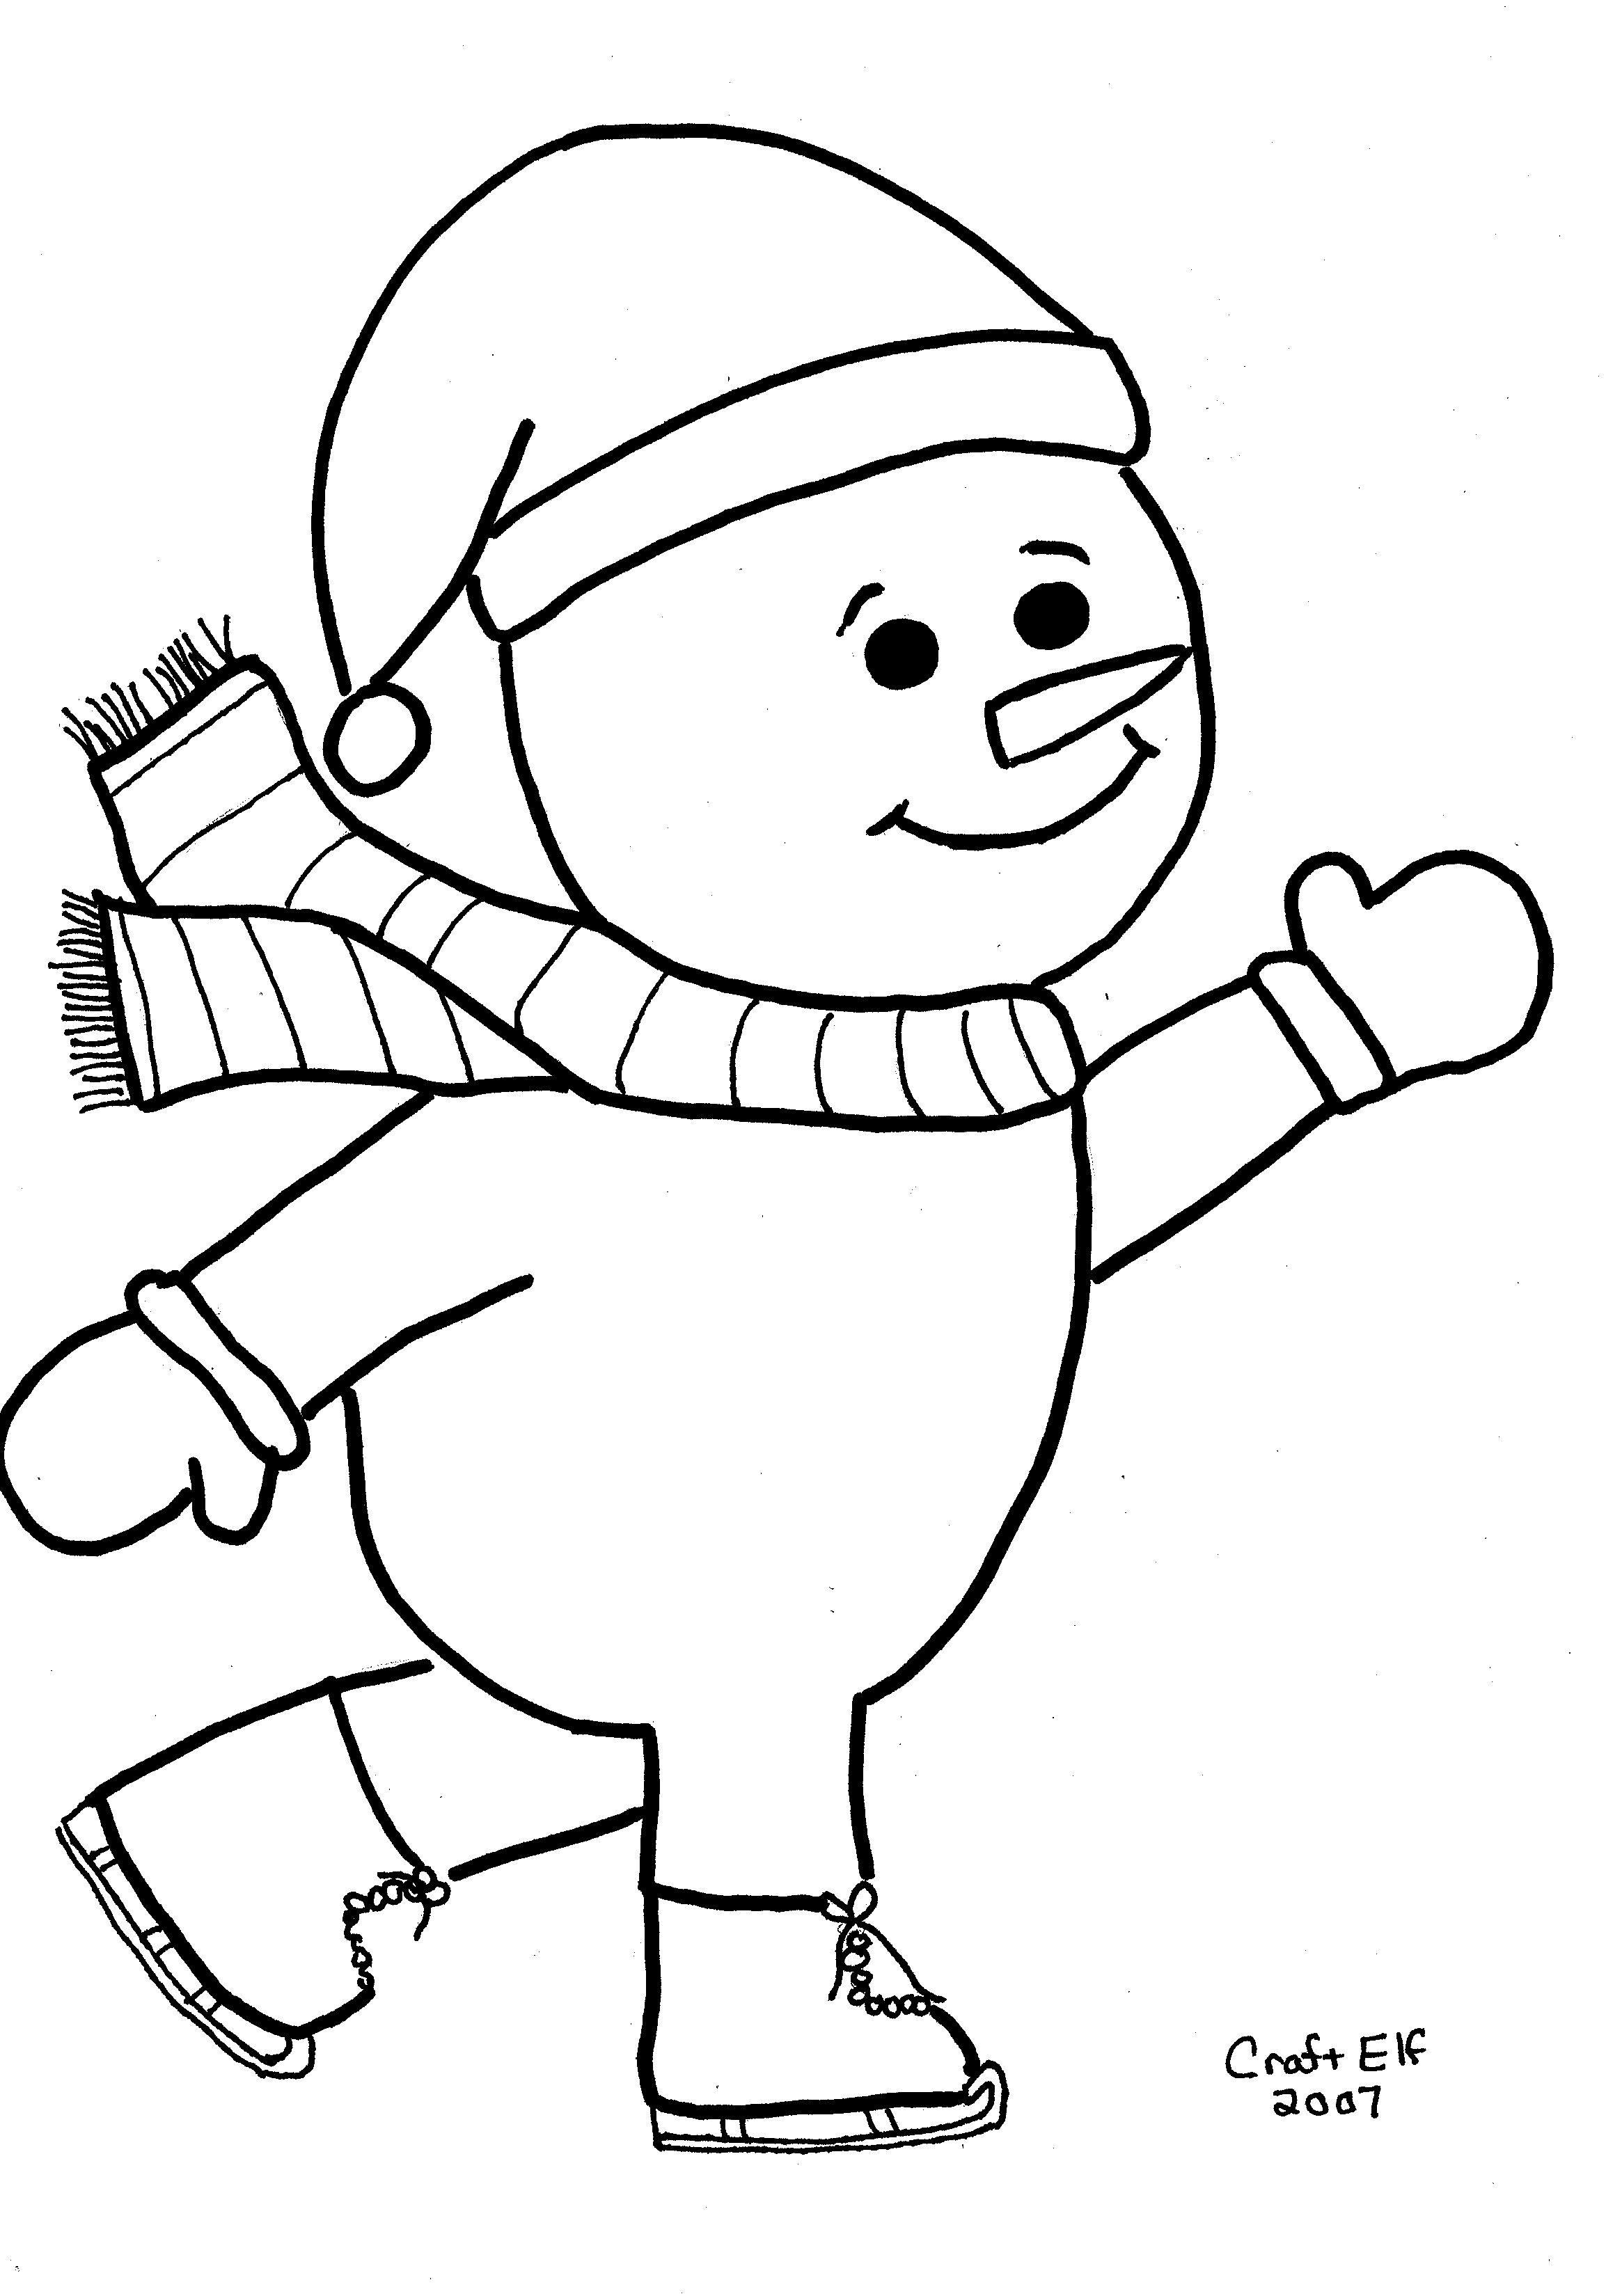 Snowmen Coloring Pages Skating Snowman Coloring Page